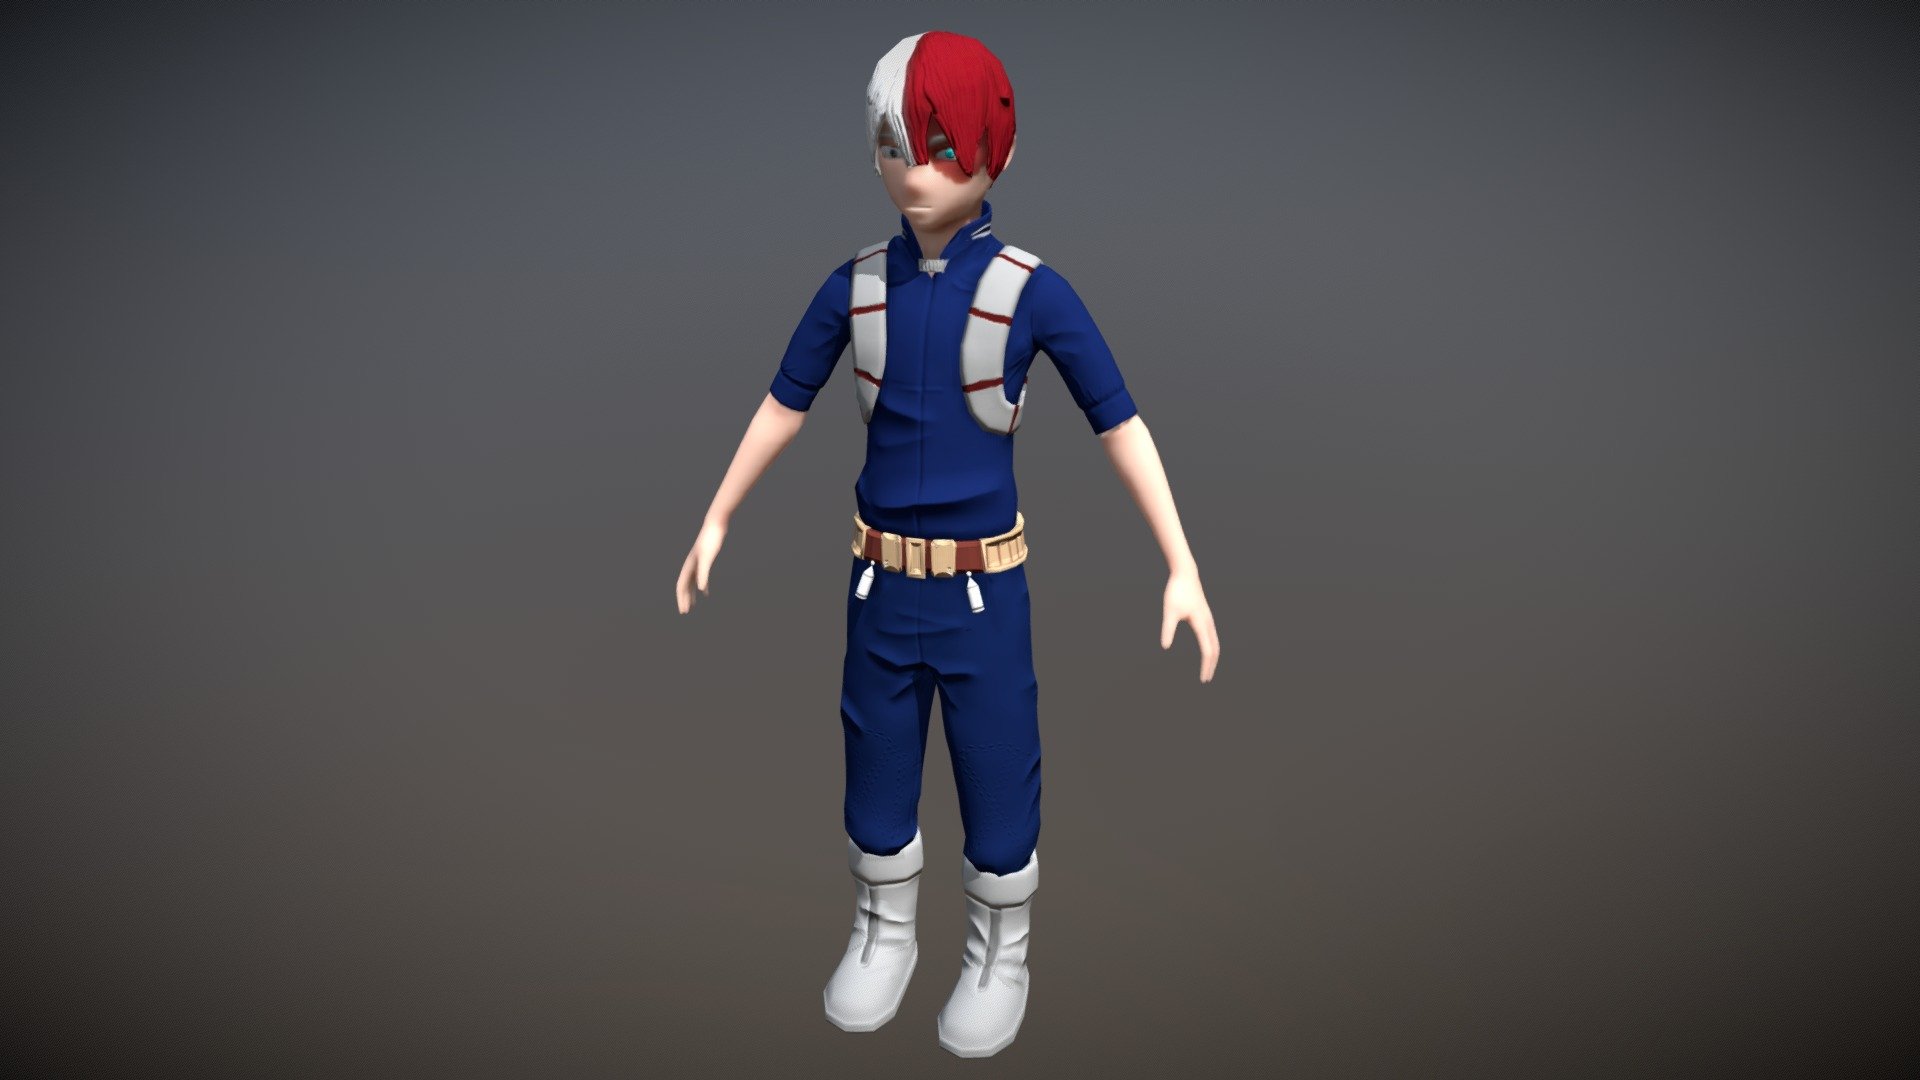 The character from My Hero Academia. Shoto Todoroki. Made in Maya, Zbrush.

Please support me by buying the model, so I can improve and make more!
You can find other models of the anime down below.

Izuku Midoriya : https://sketchfab.com/models/78eeebaf1e1d448a980ab0af65bc599e

Bakugo Katsuki :
https://sketchfab.com/models/e976bae6e7534f7ca74f3fb4f4700bc5?ref=related

It’s easy to use! Do download the FREE AccuRIG auto-rigging tool: https://actorcore.reallusion.com/auto-rig


AccuRIG - Shoto Todoroki - Buy Royalty Free 3D model by amiruler 3d model